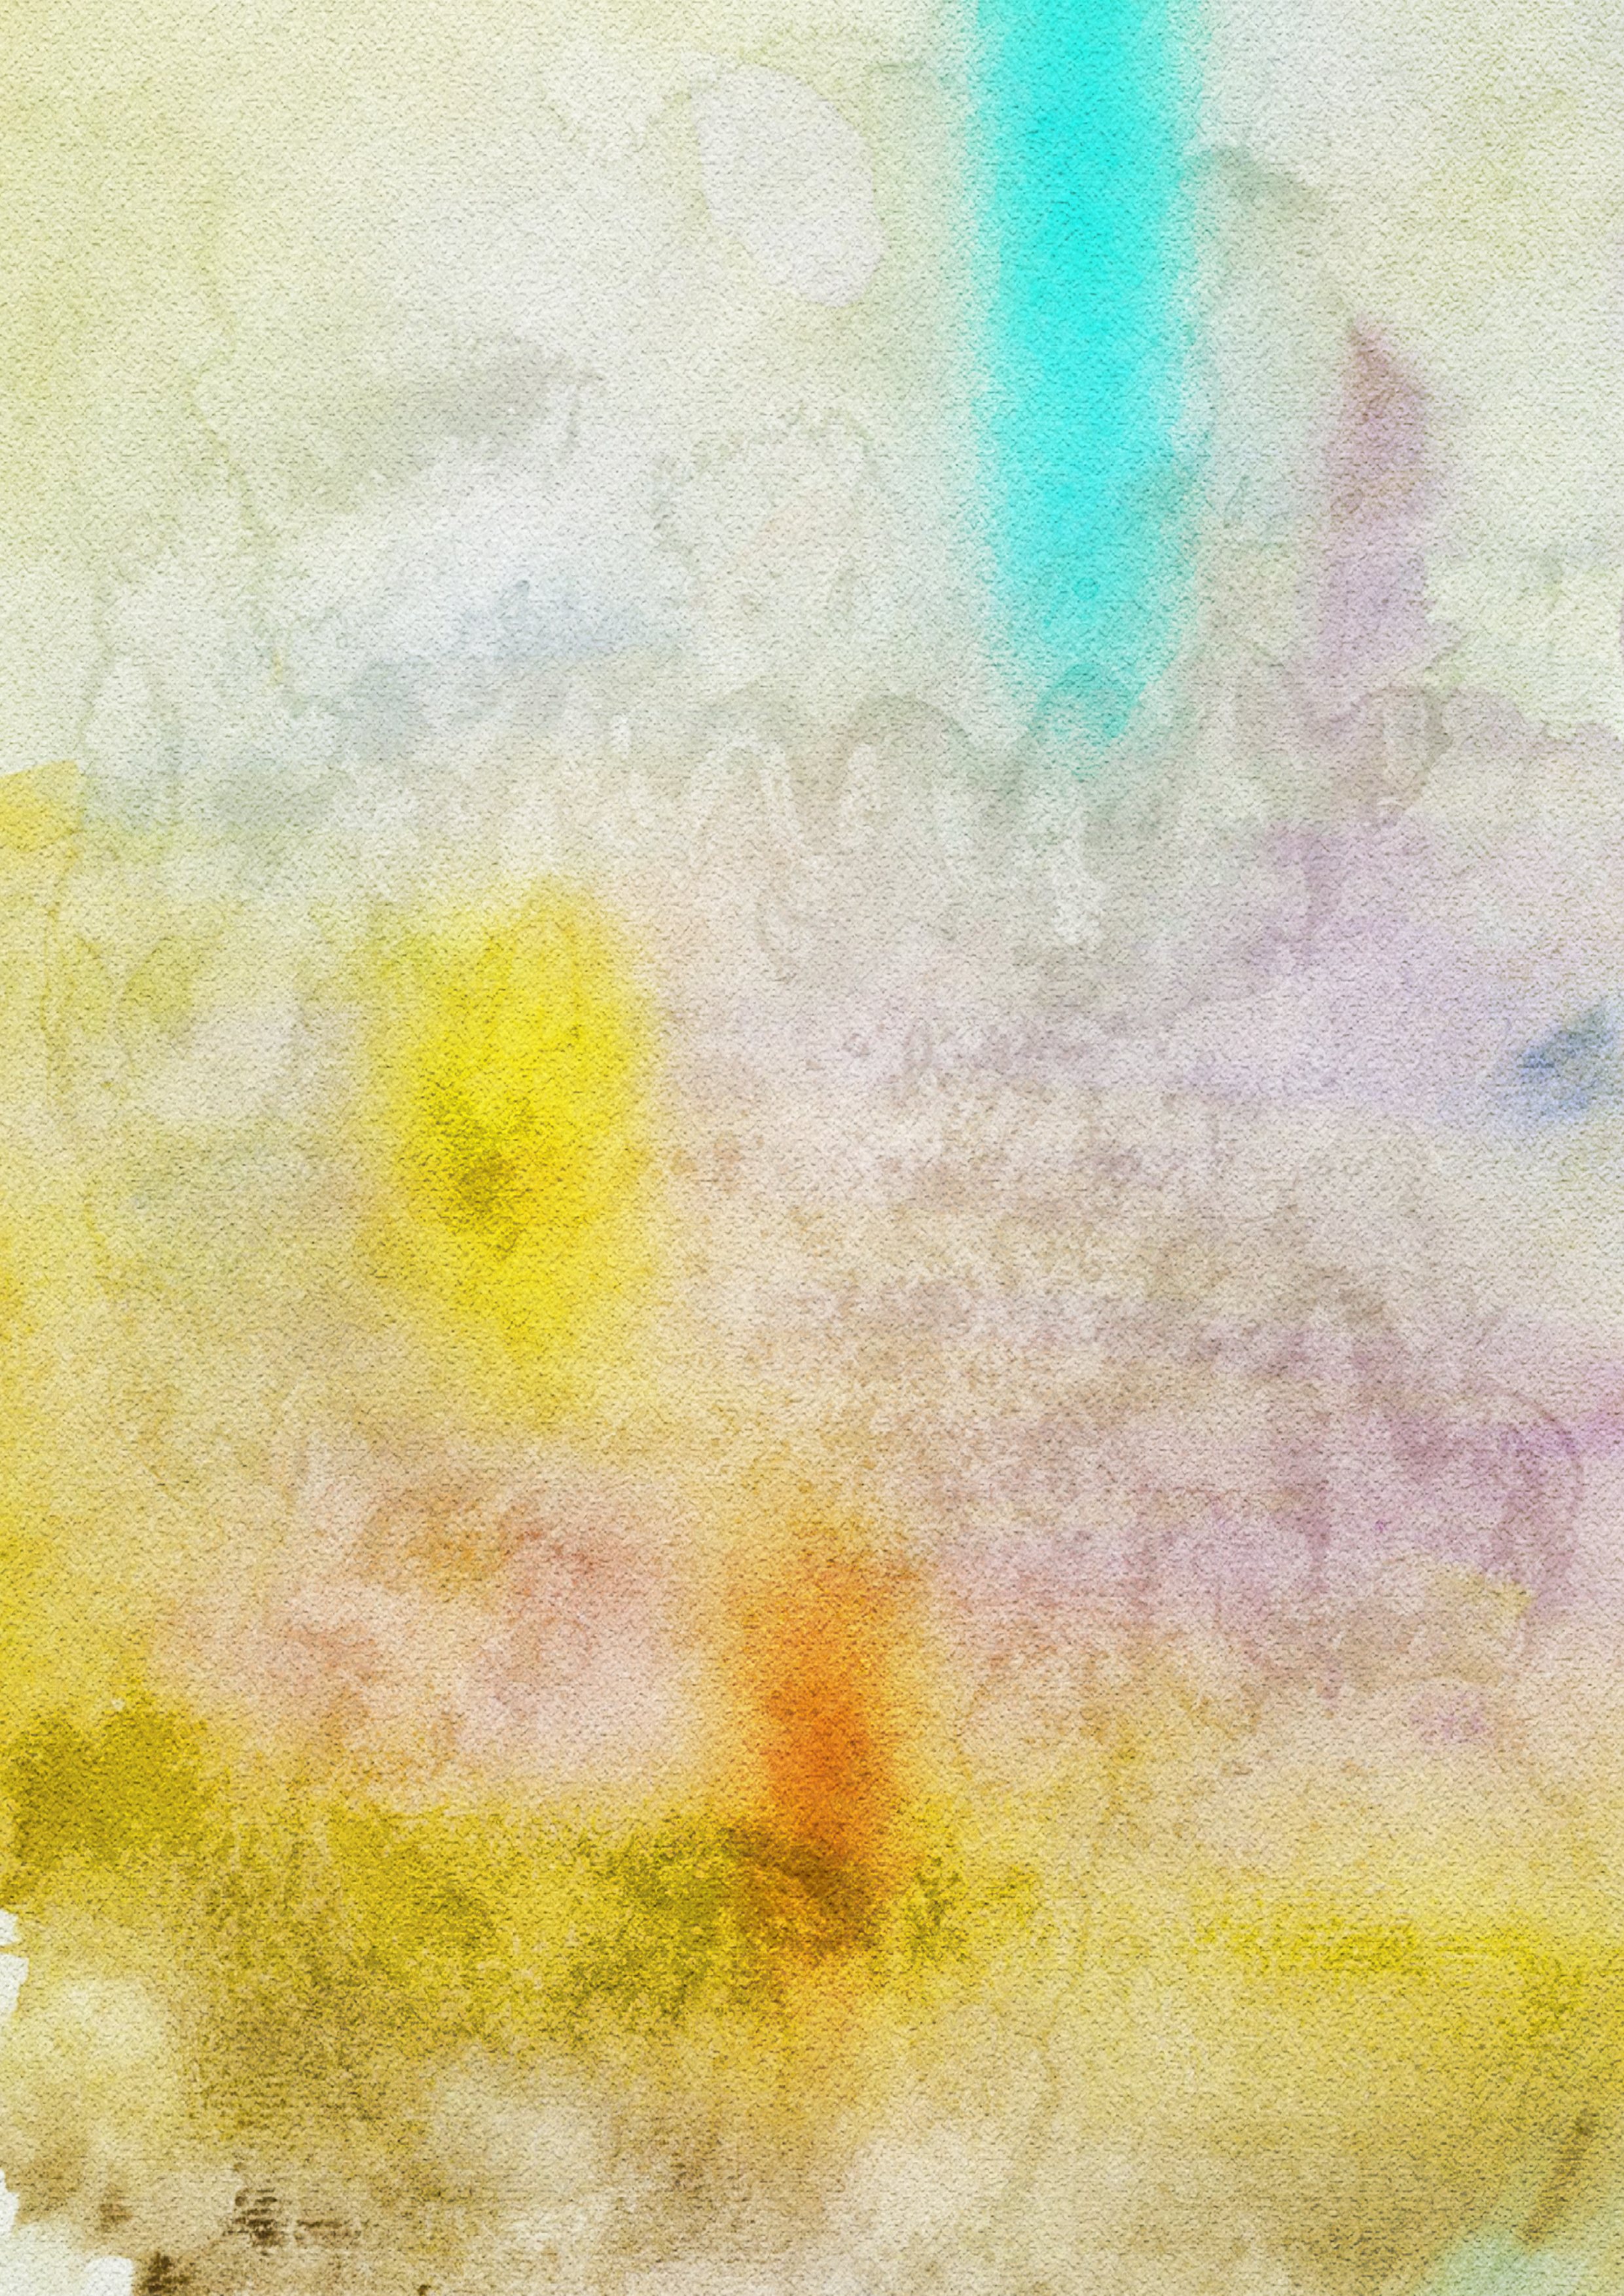 Free Blue Yellow and White Watercolor Texture